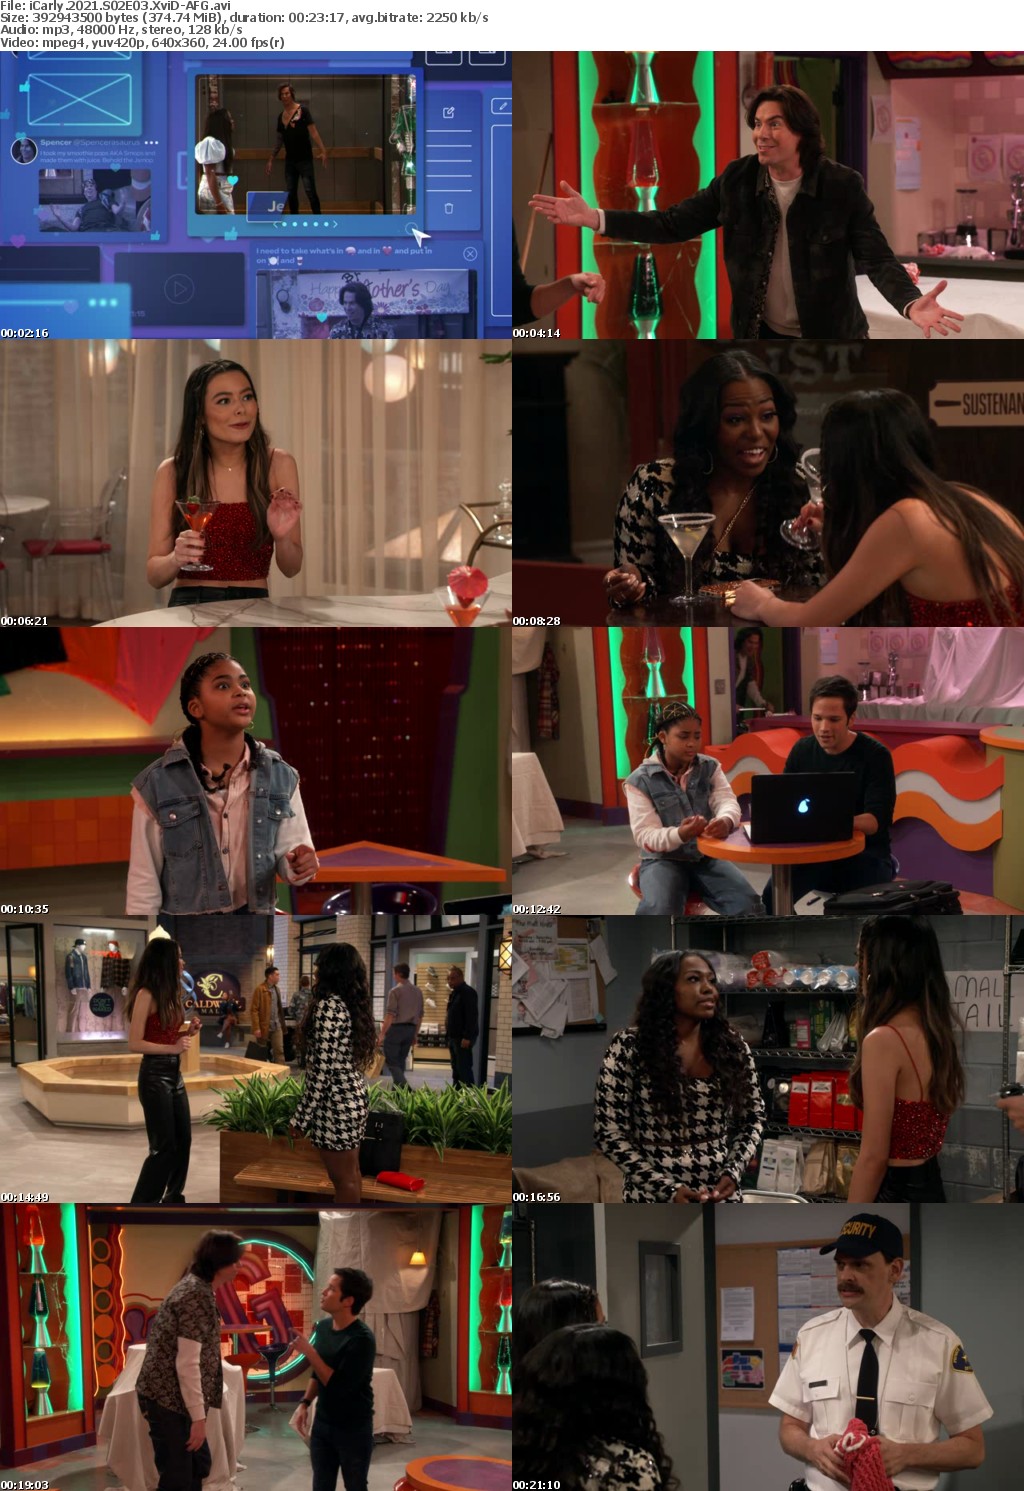 iCarly 2021 S02E03 XviD-AFG